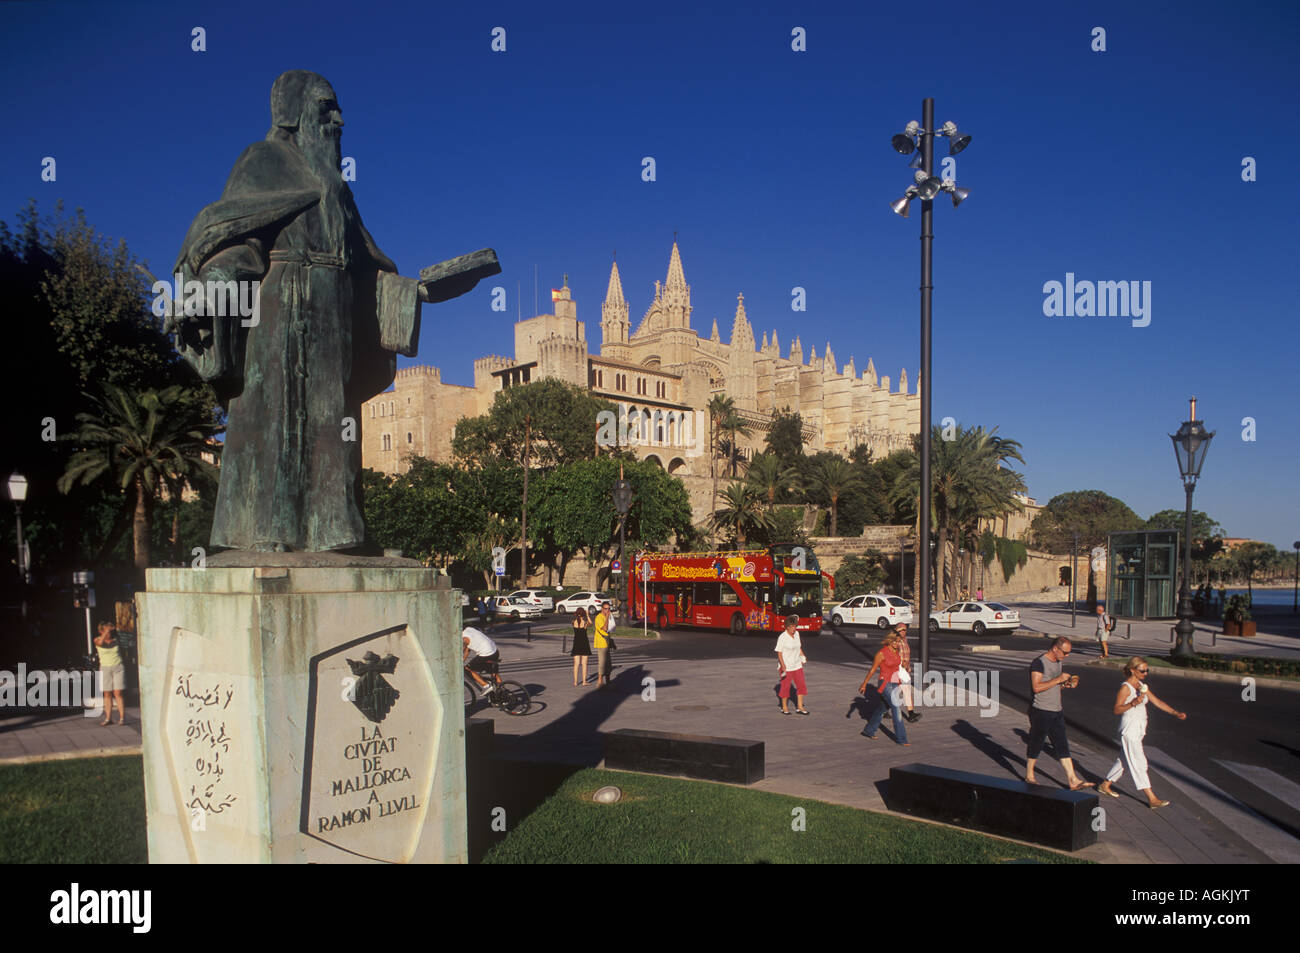 Monument to Ramon Llull, Scholar + Almudaina Palace and Gothic Cathedral, Palma de Mallorca, Spain. Stock Photo